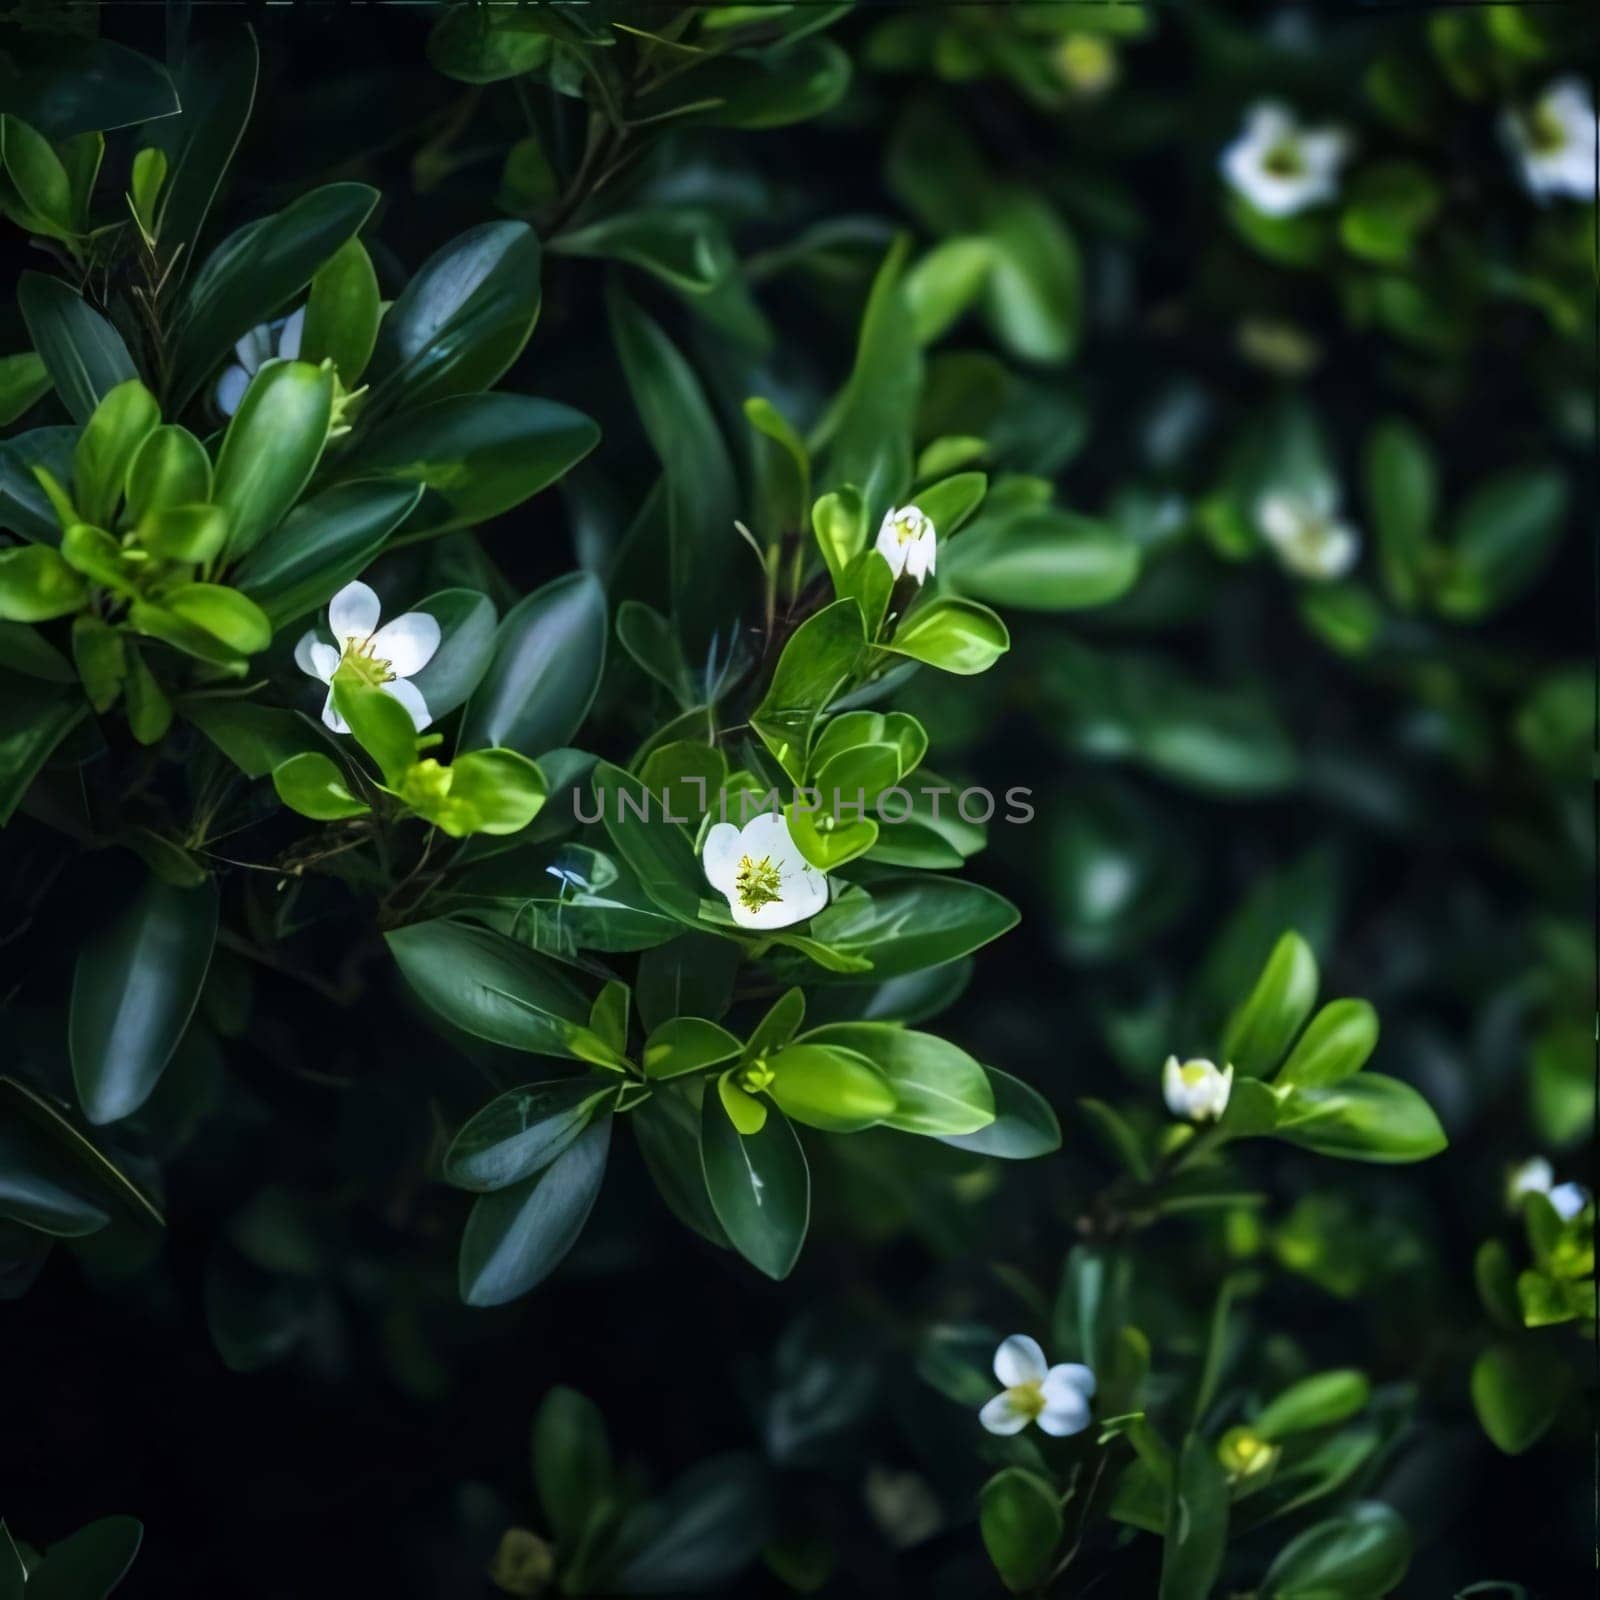 Green leaves and tiny white flowers.Flowering flowers, a symbol of spring, new life.A joyful time of nature waking up to life.